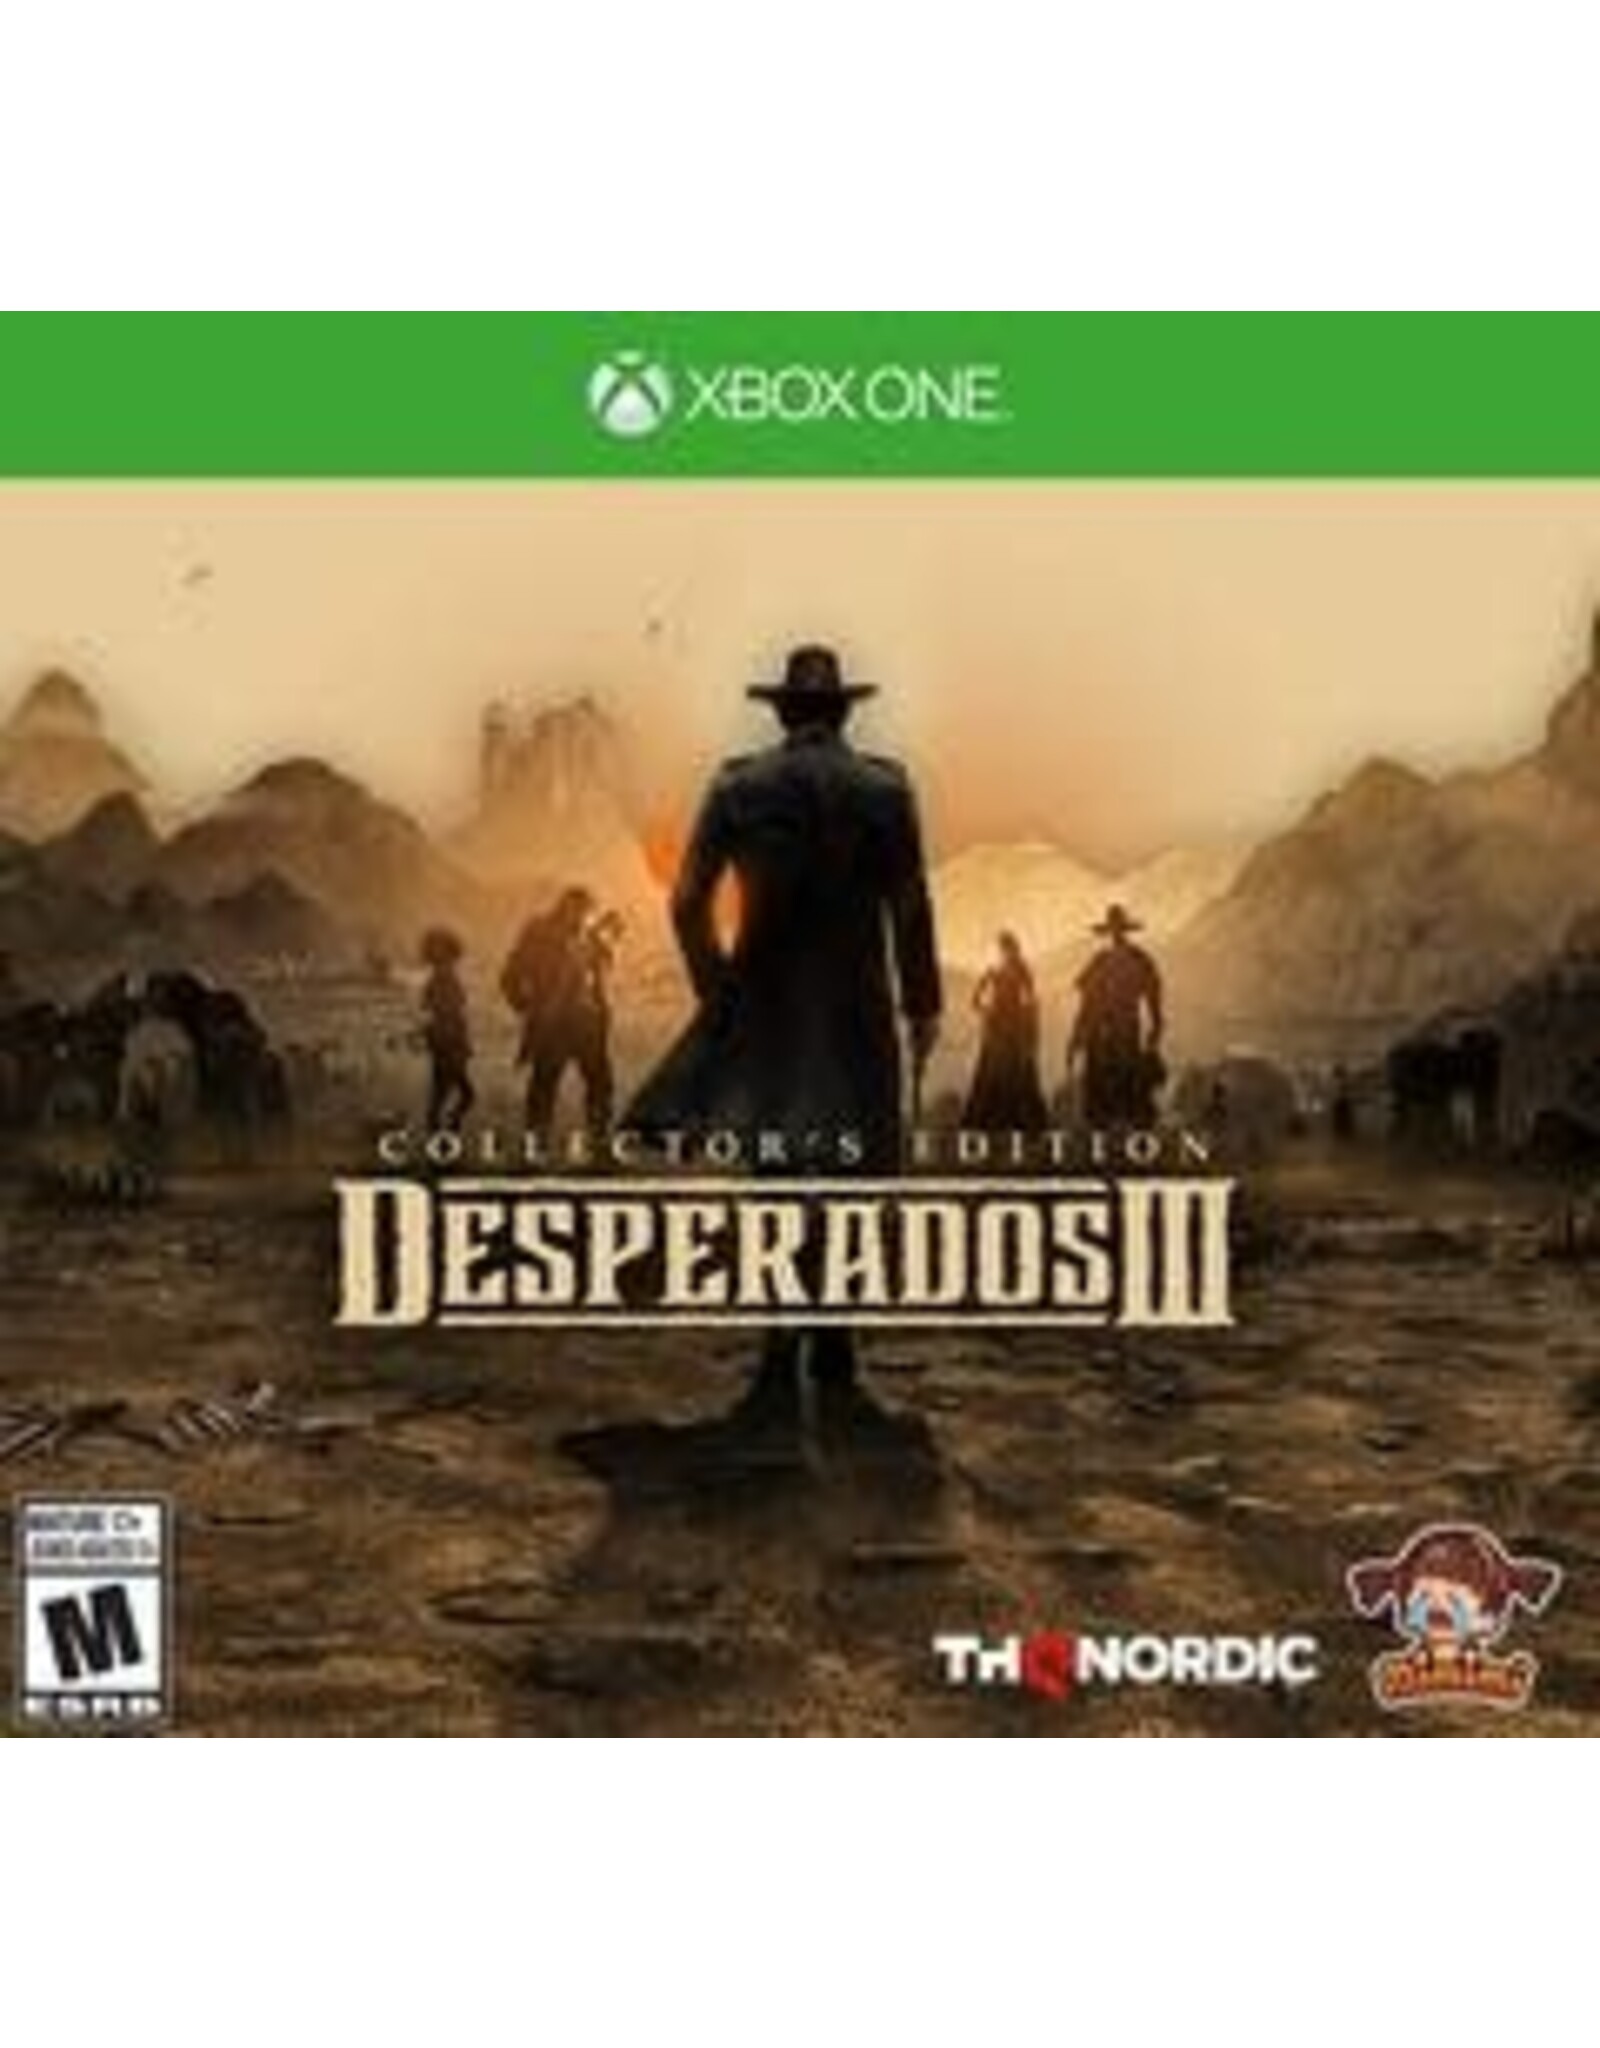 Xbox One Desperados III Collector's Edition (XBO, Lightly Damaged Outer Sleeve)